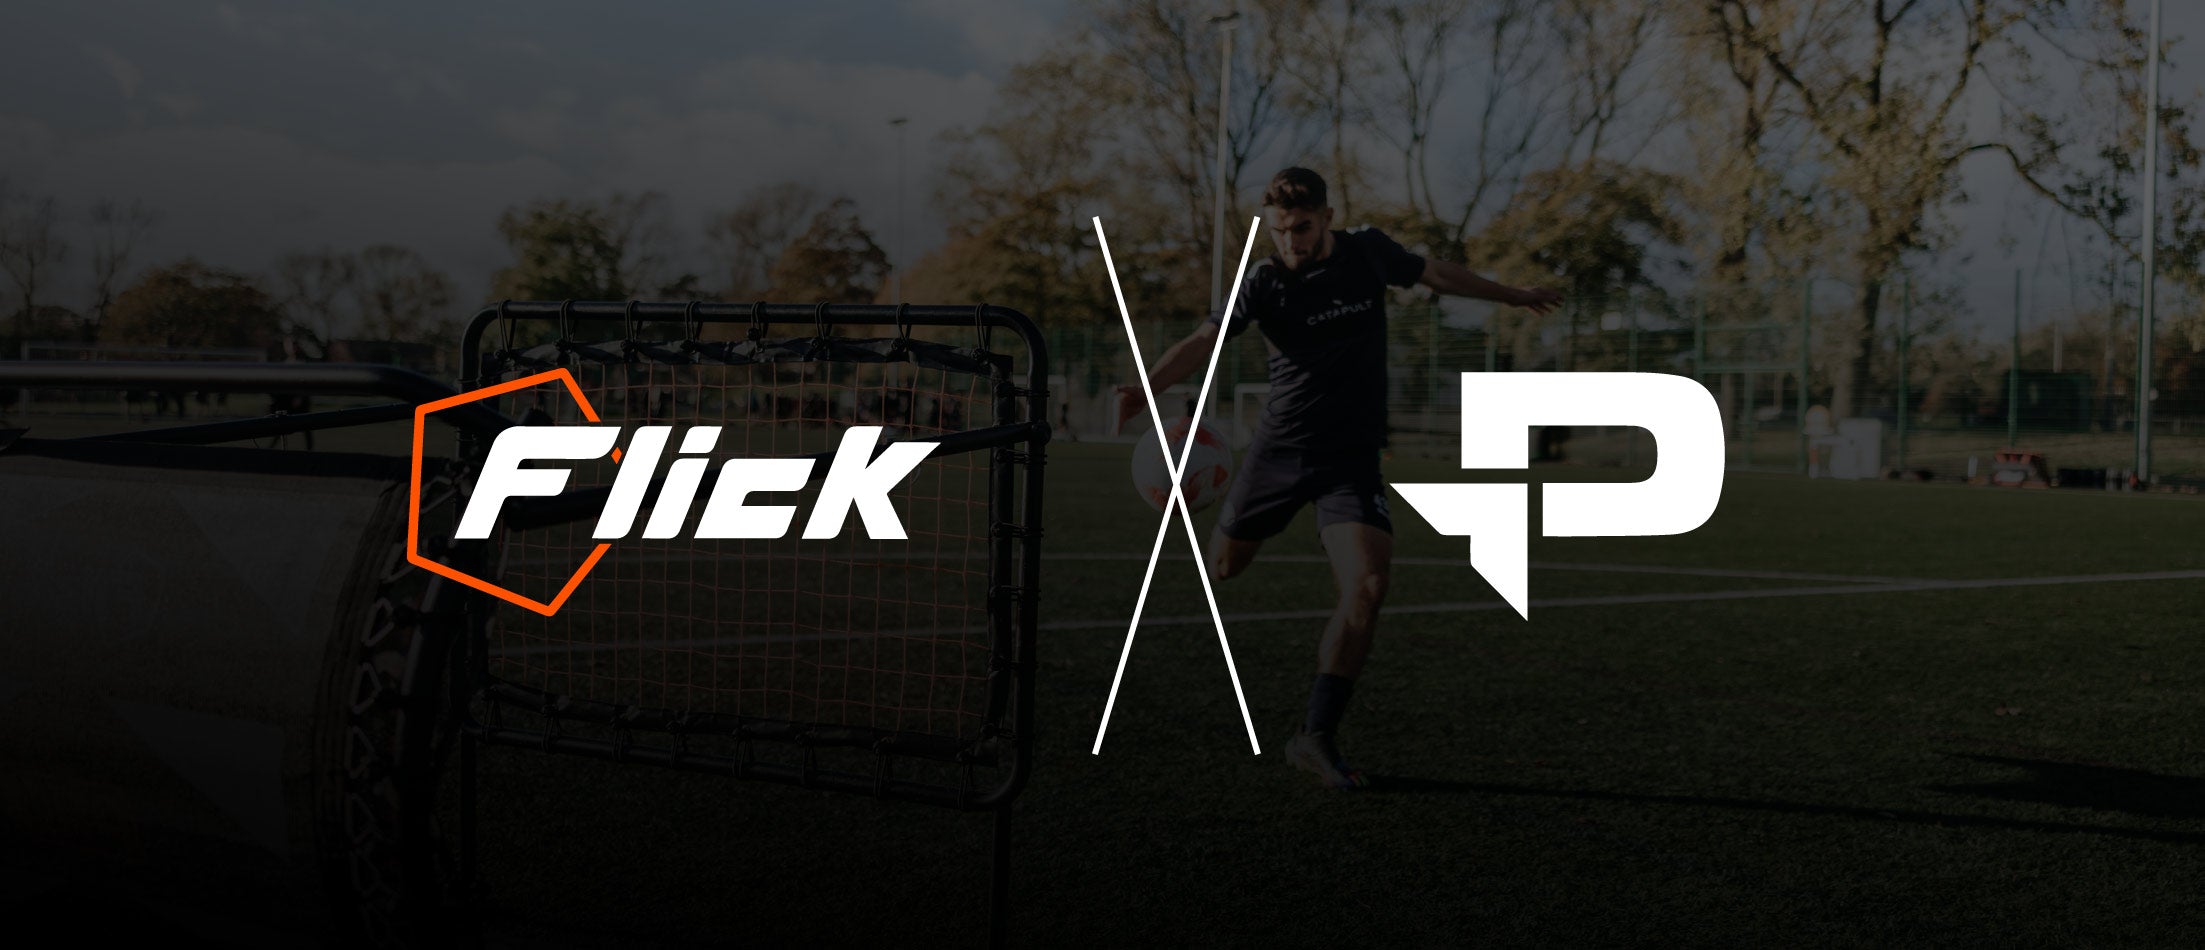 Flick Extend Retail Partnership With Pro:Direct